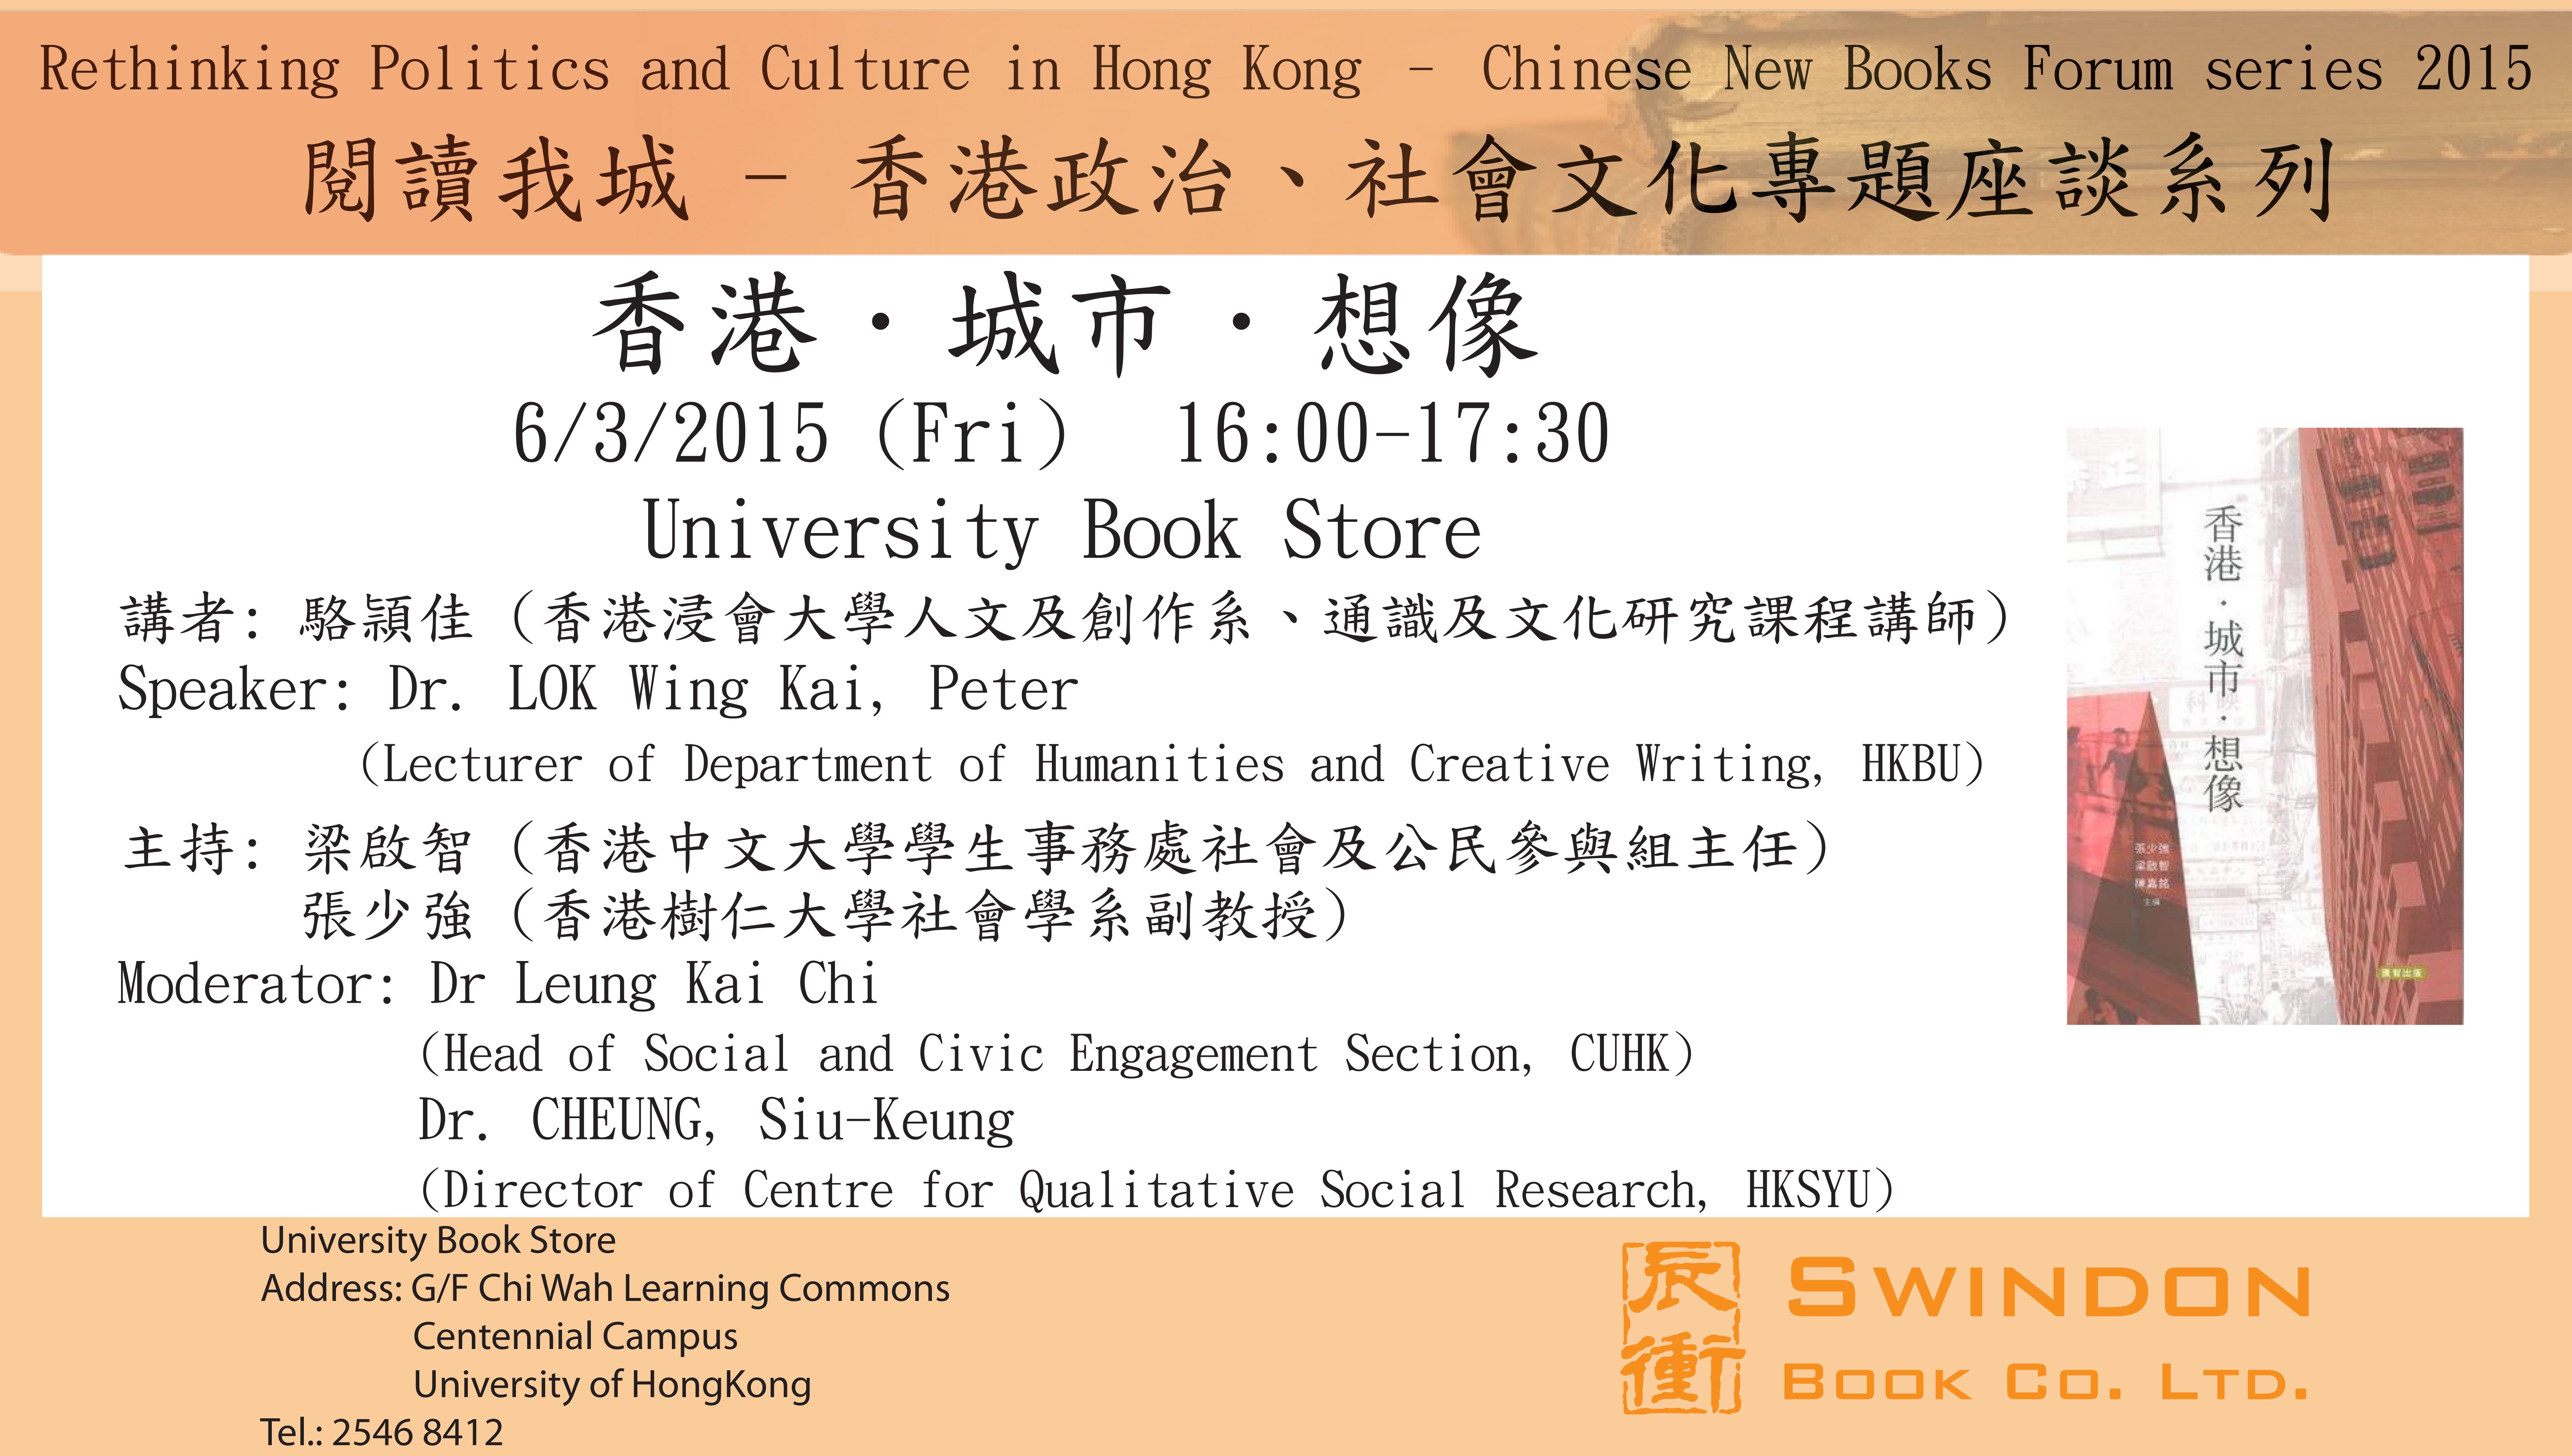 Chinese New Books Forum by Dr. LOK Wing Kai, Peter (Language: Cantonese)